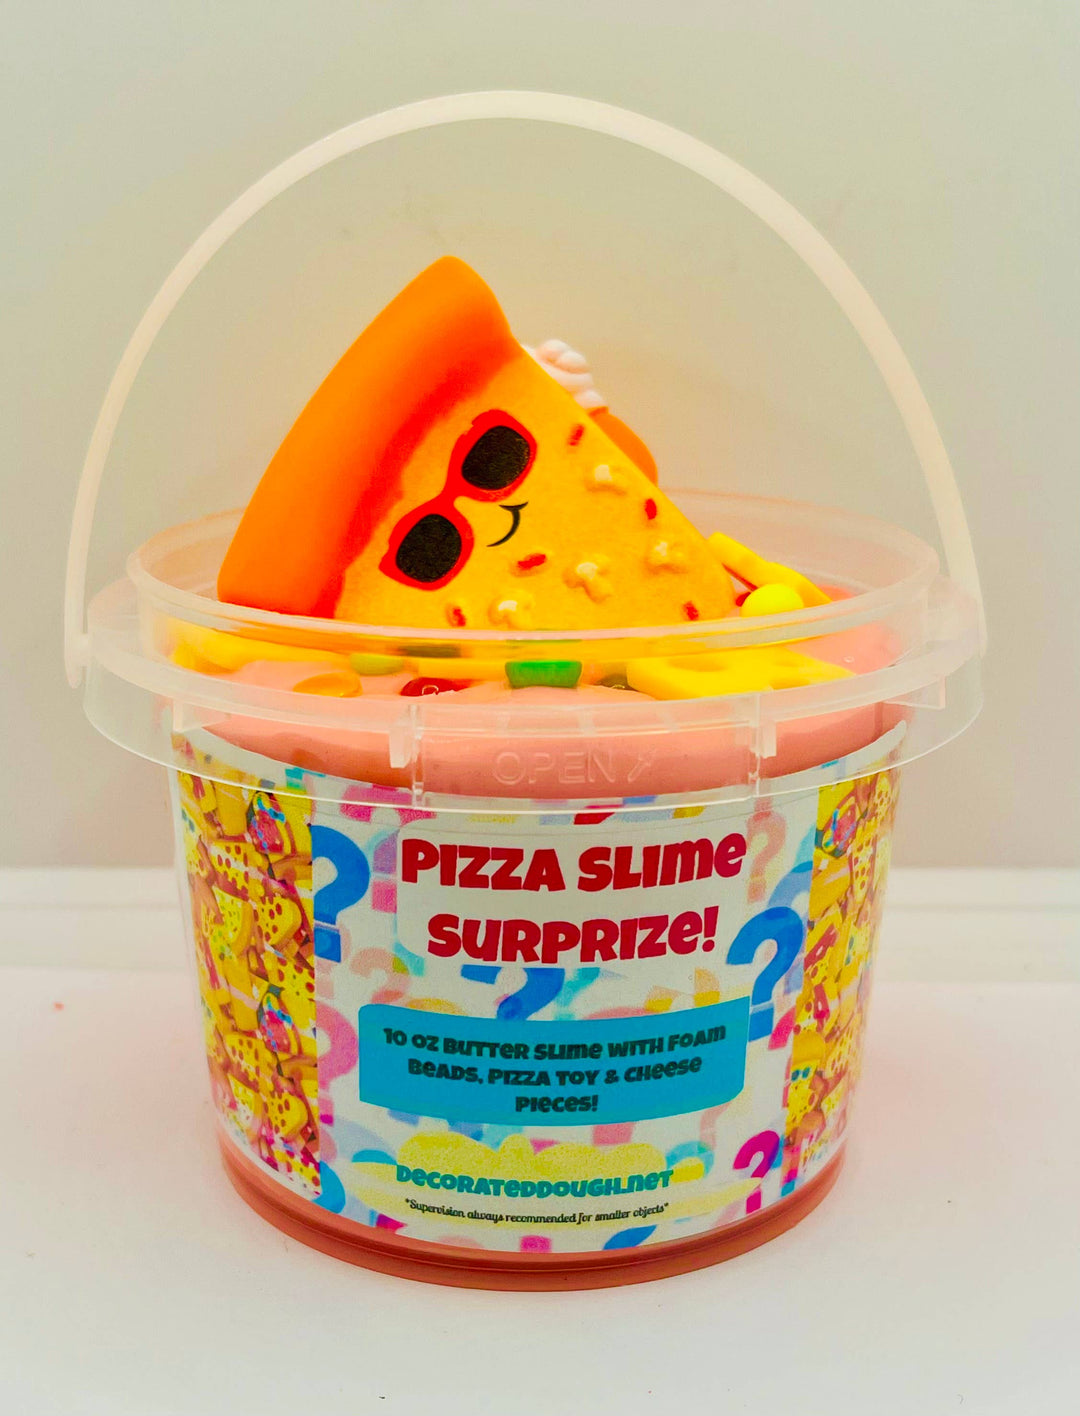 Pizza Slime Surprize - The Teal Antler Boutique